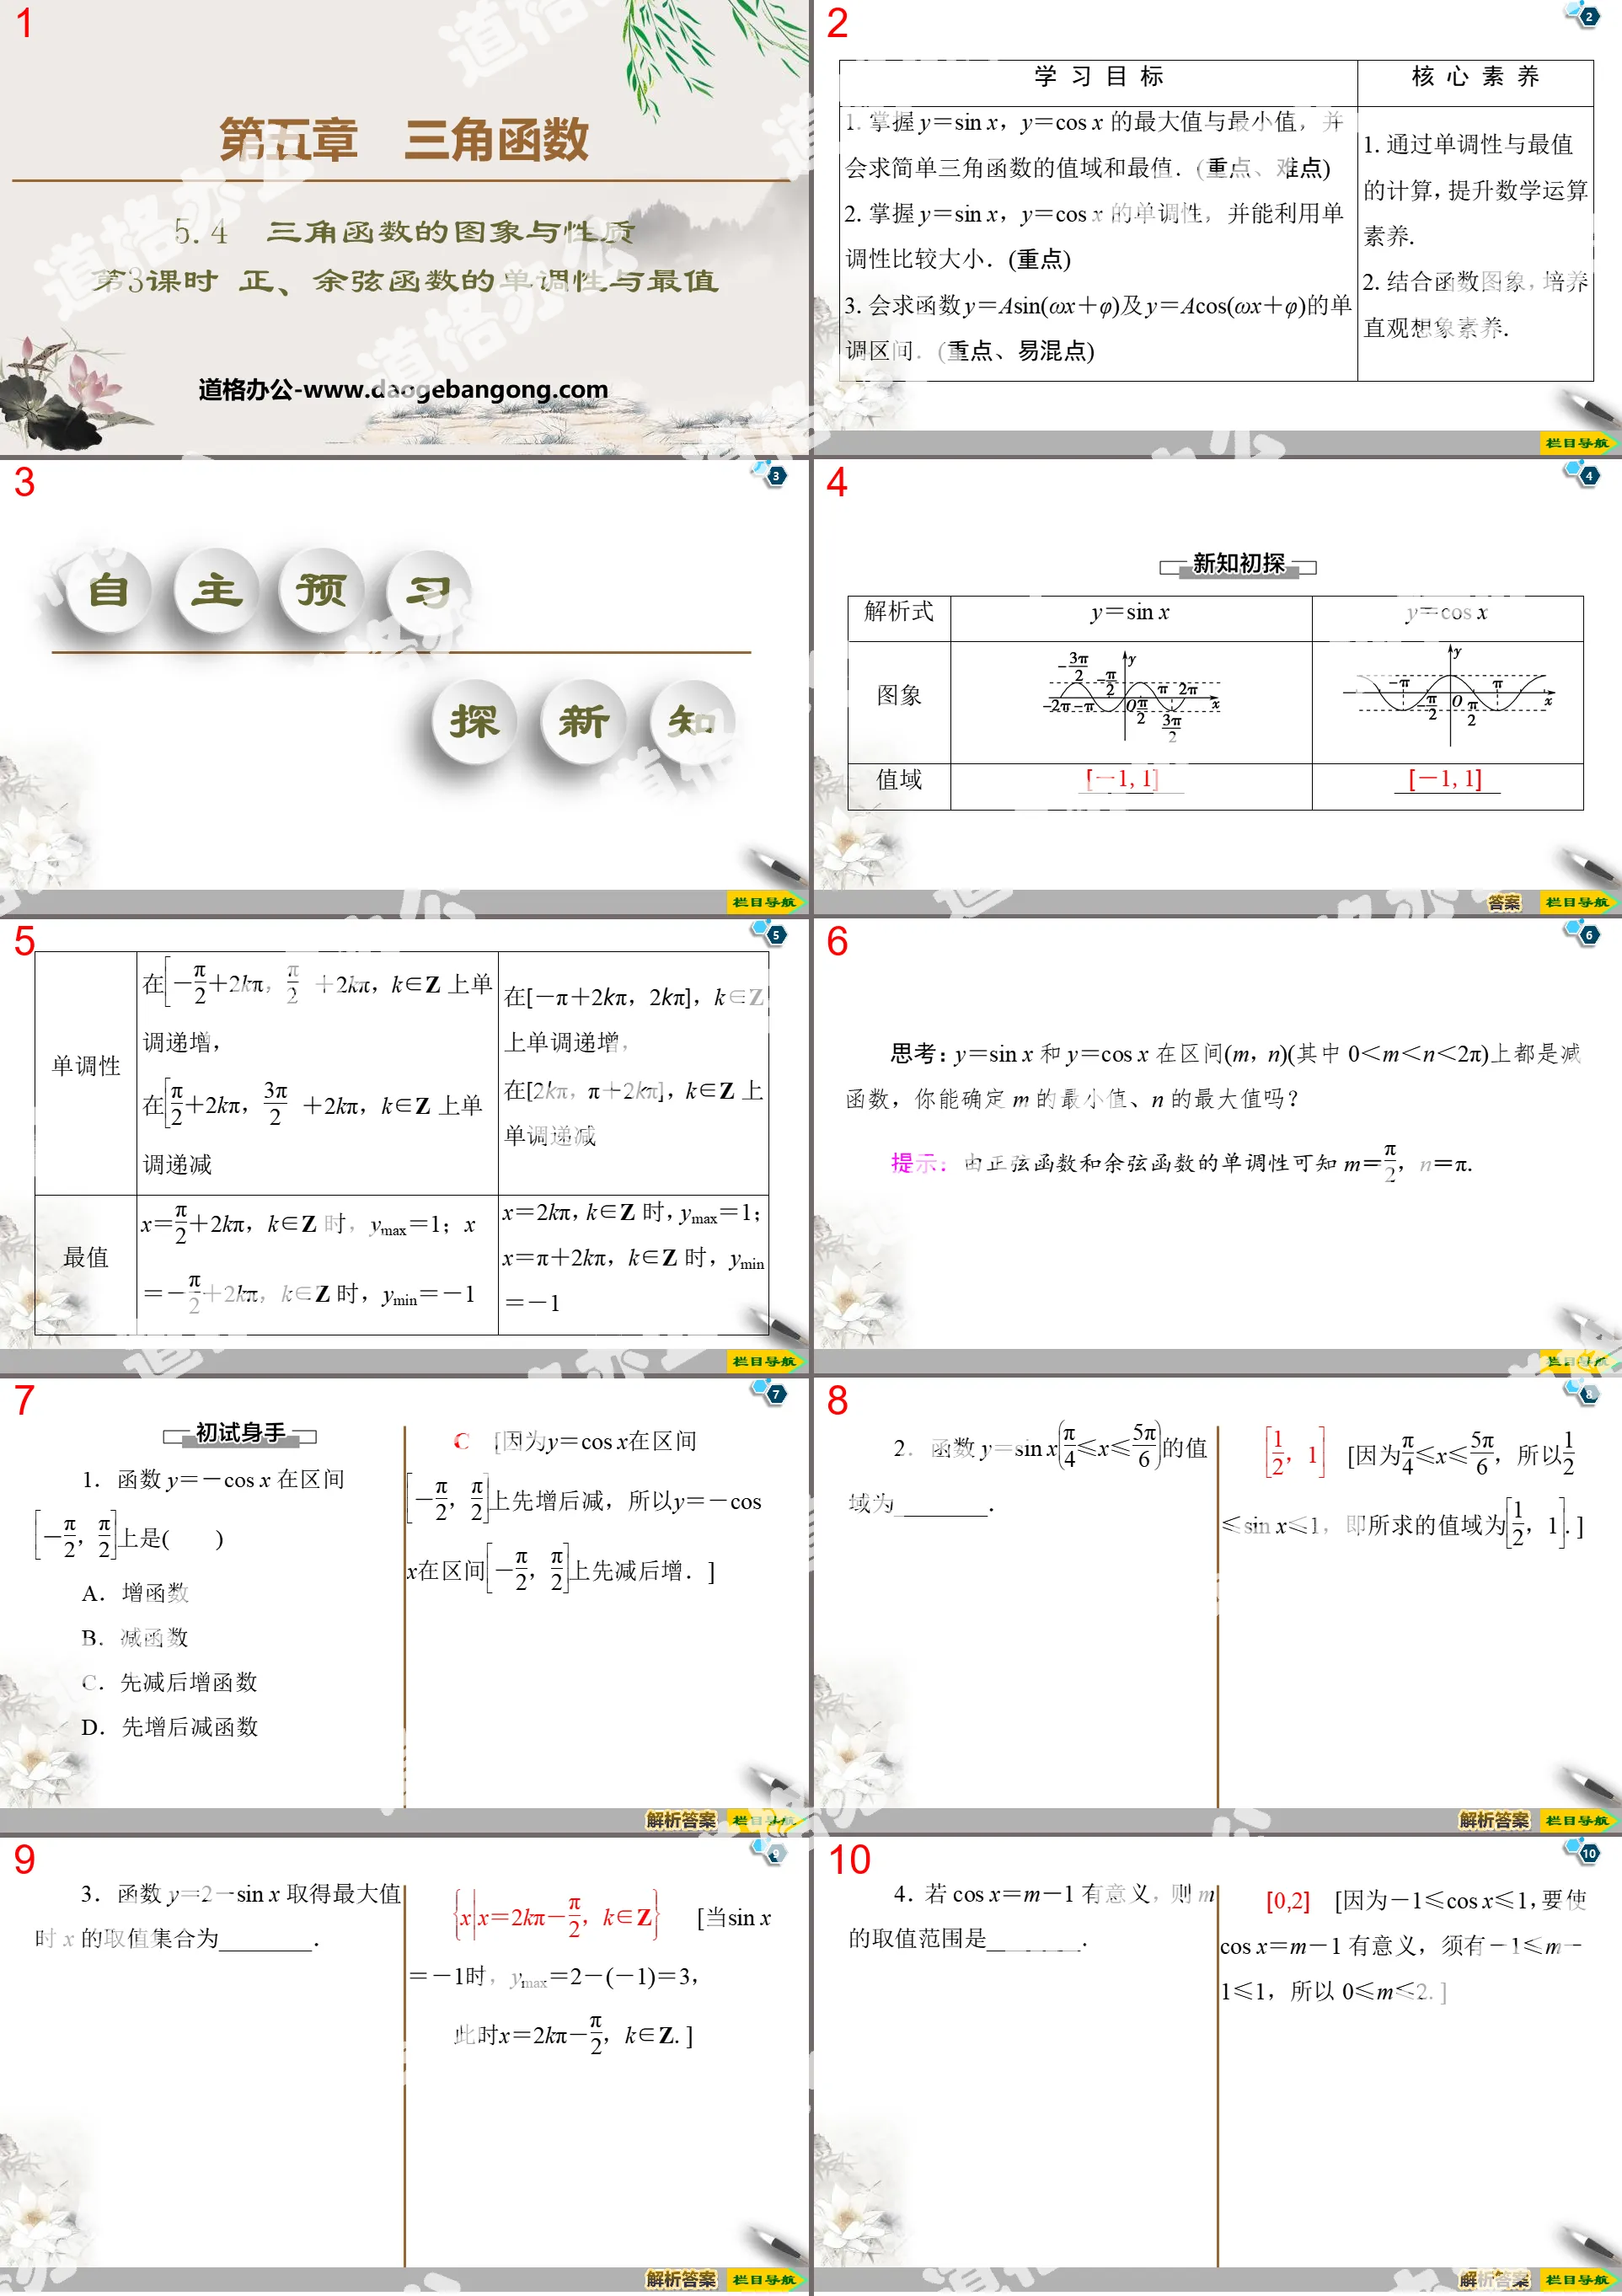 "Images and Properties of Trigonometric Functions" Trigonometric Functions PPT Courseware (Third Lesson: Monotonicity and Maximum Values ​​of Positive and Cosine Functions)